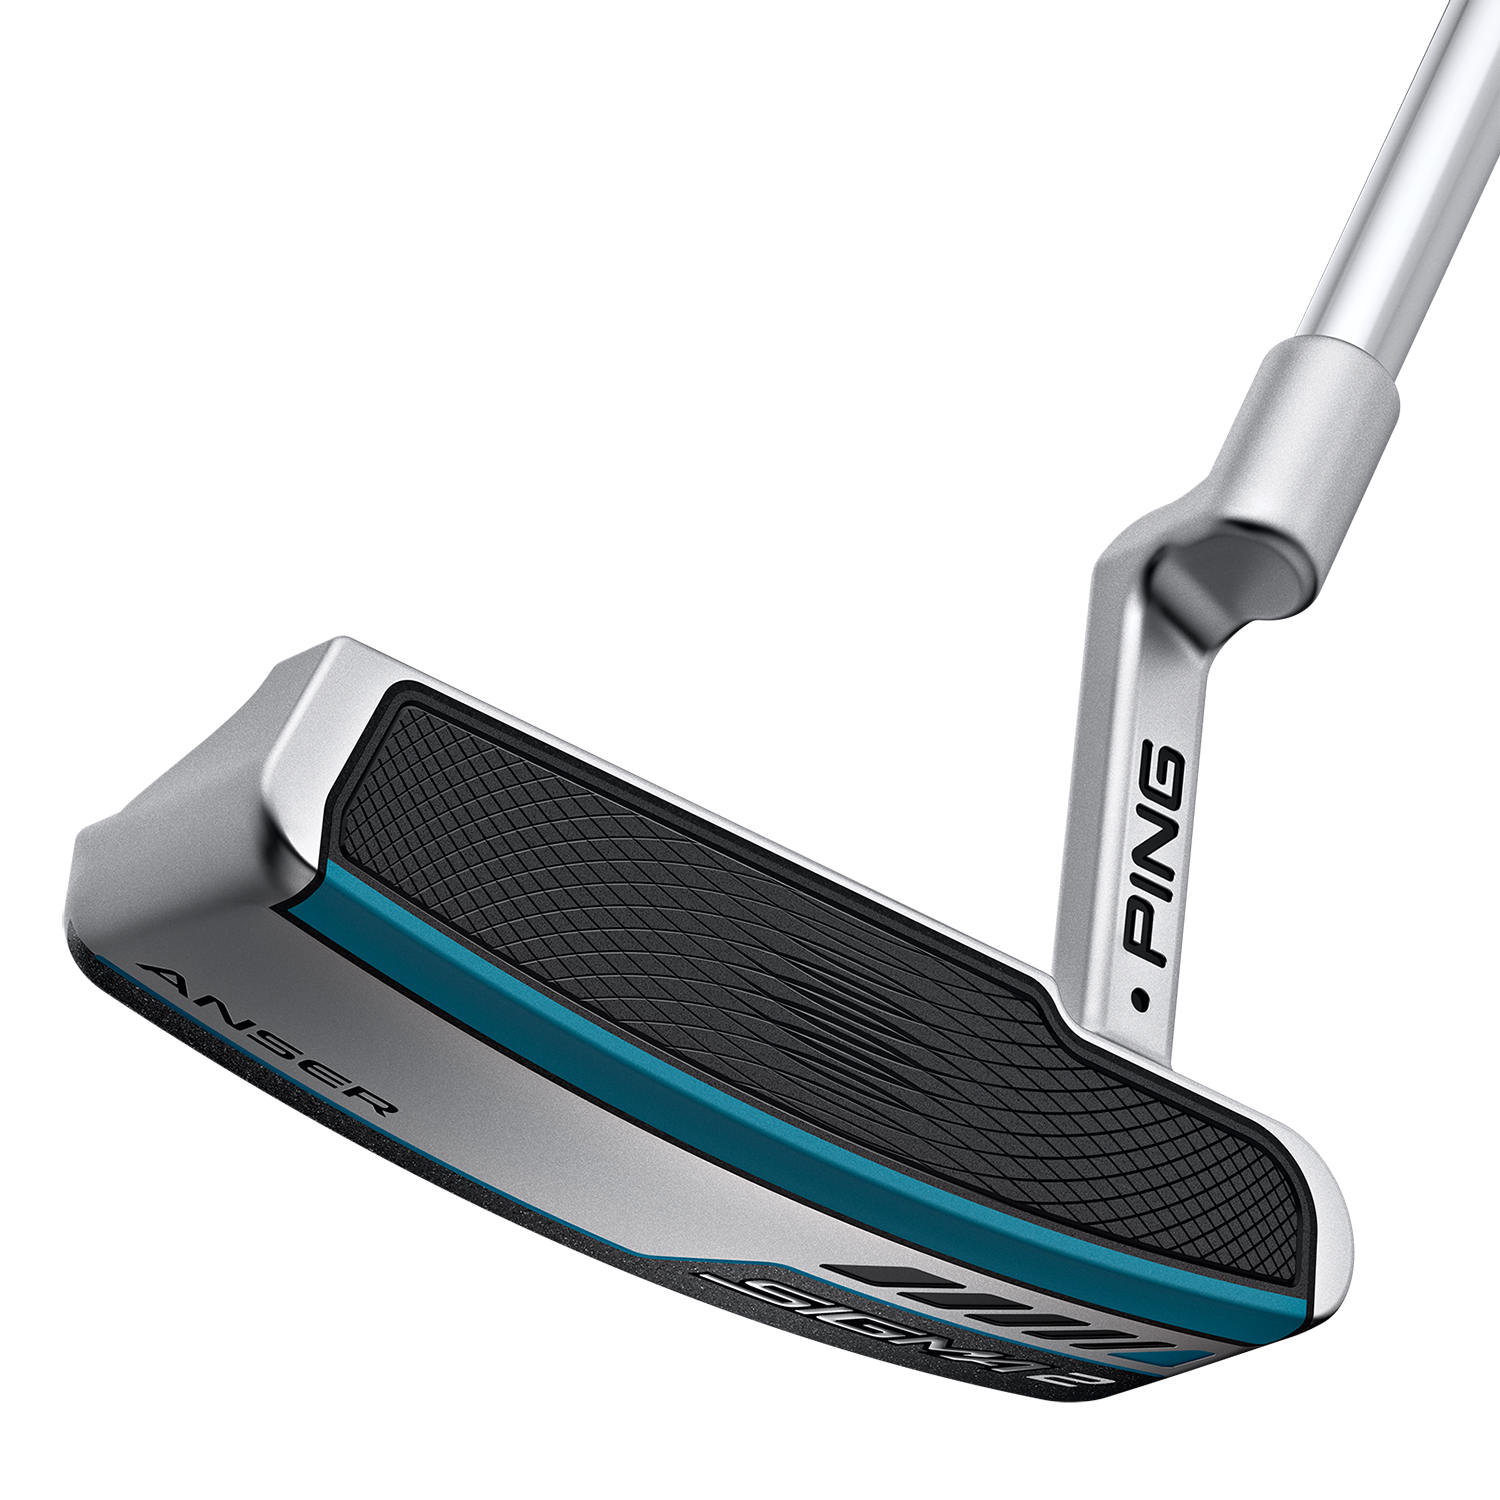 Ping anser 4 putter history